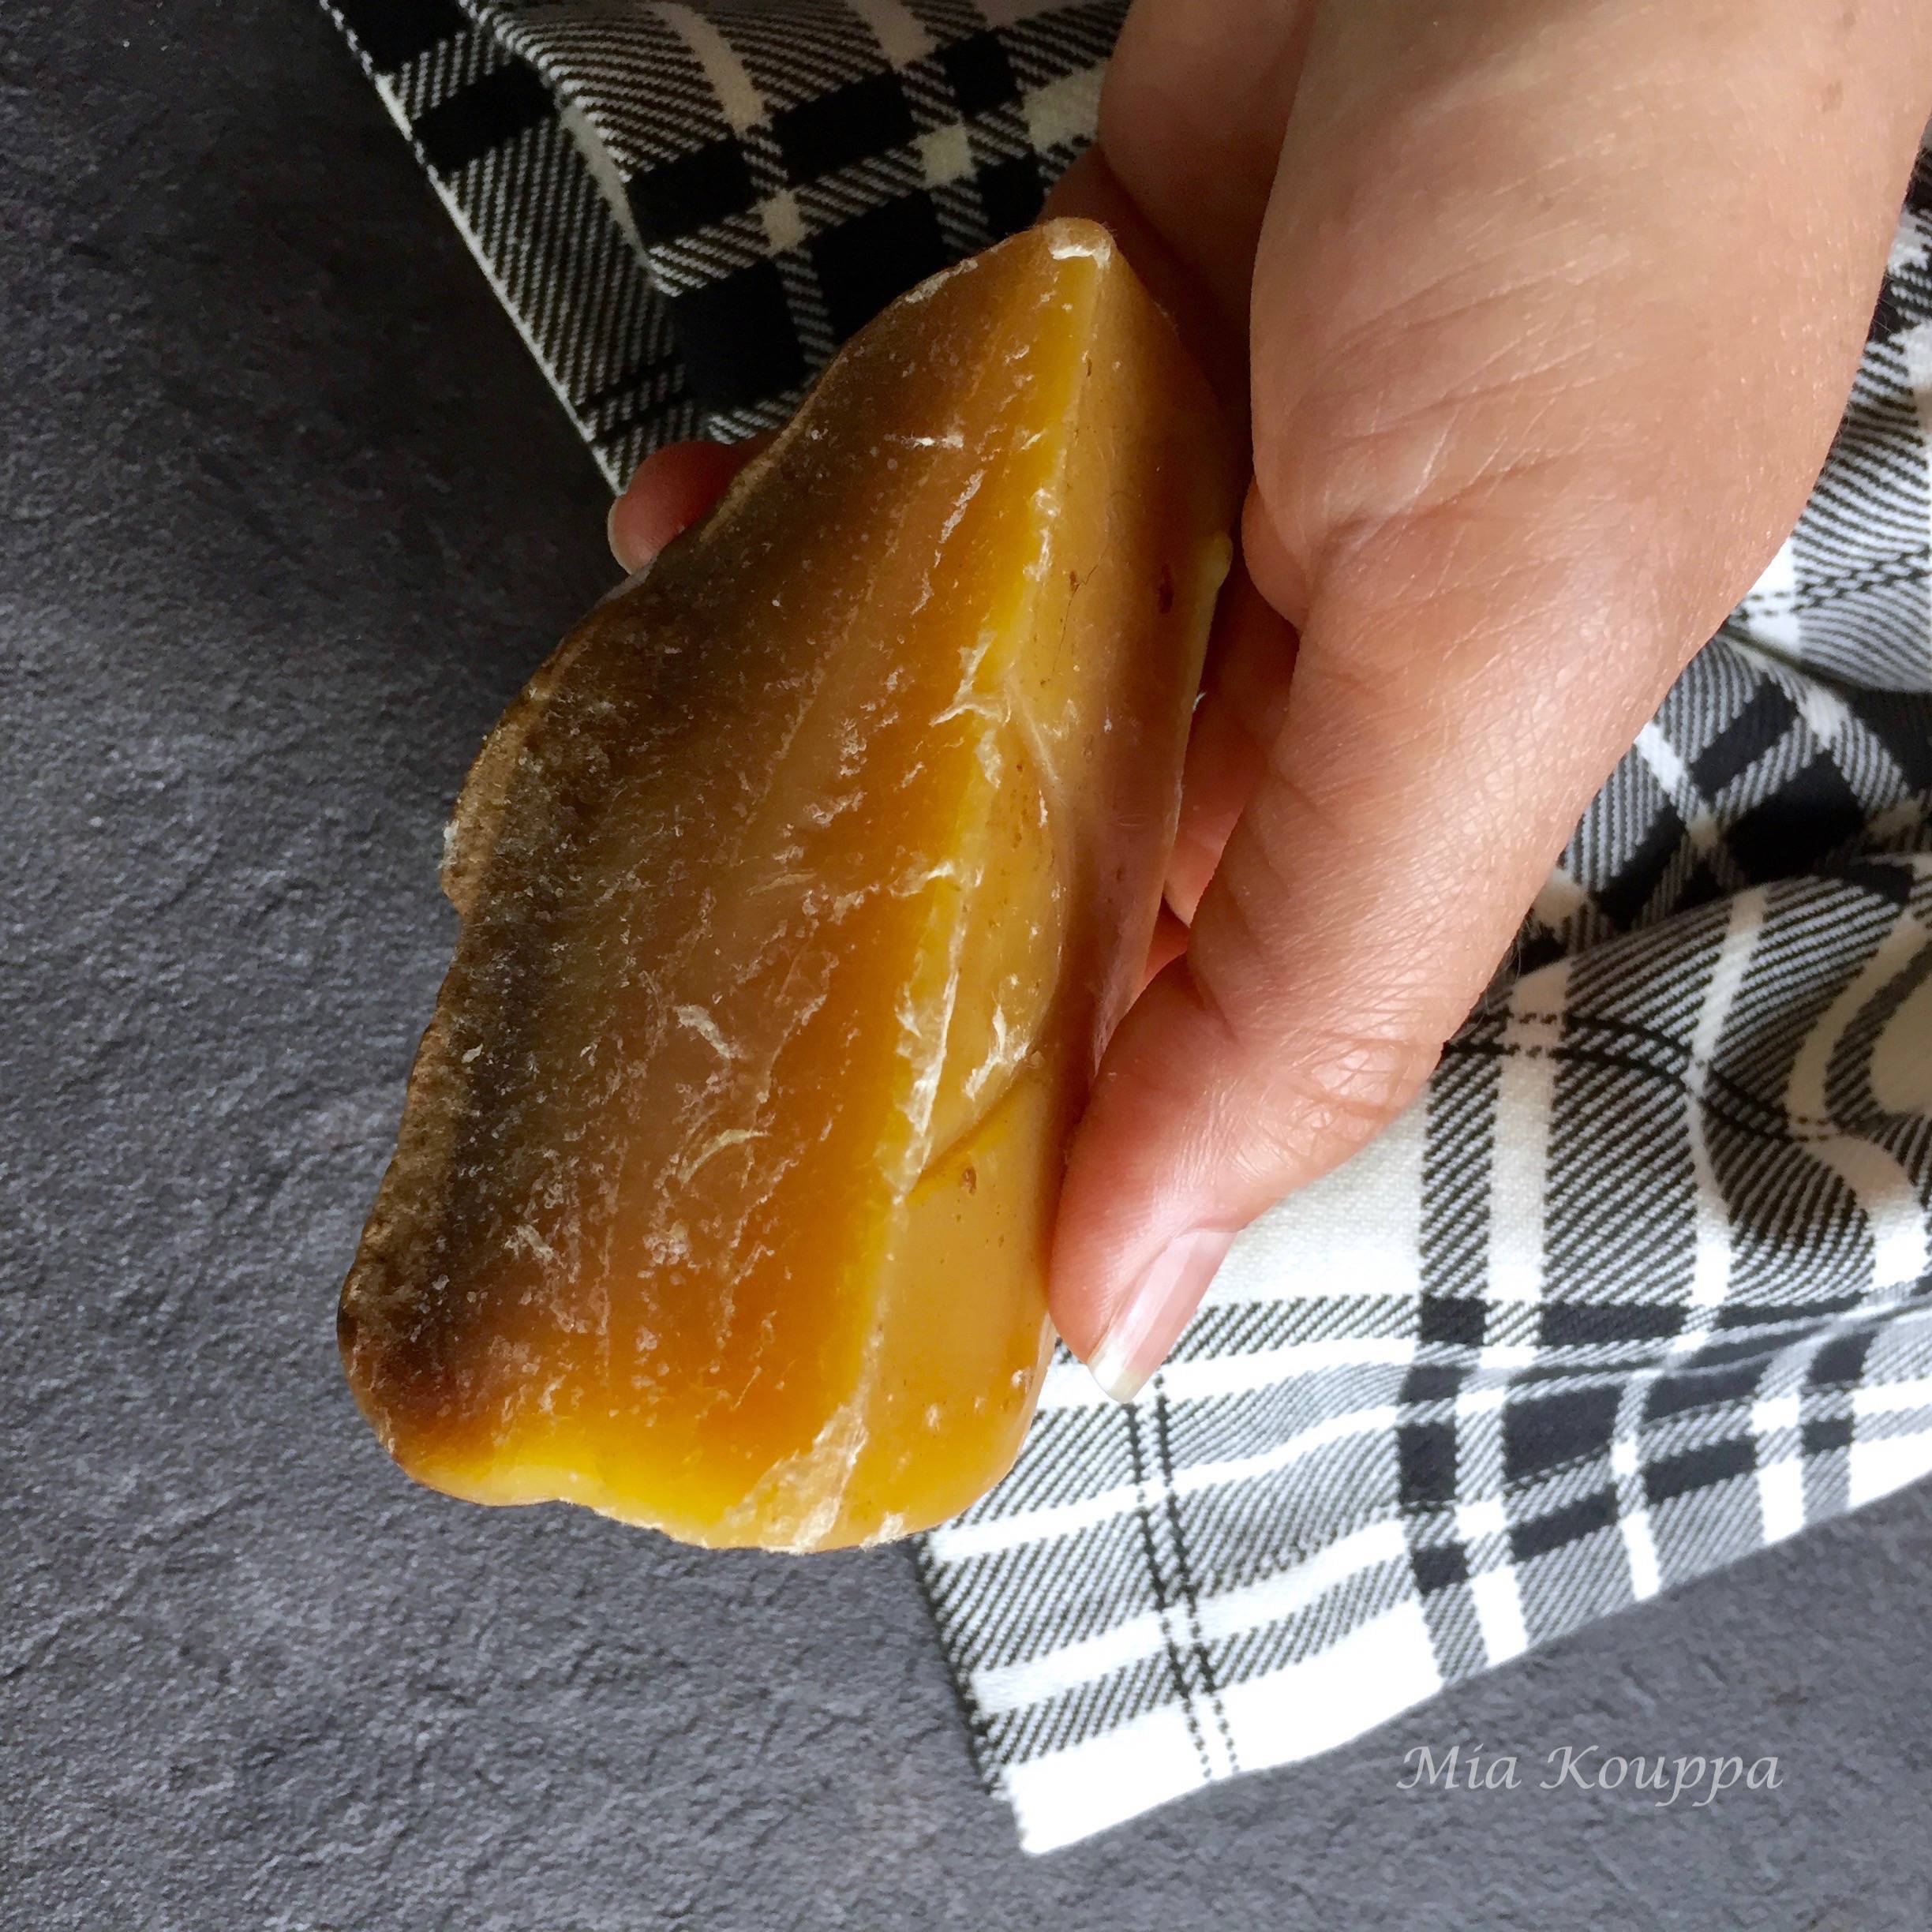 Beeswax from our grandfathers bees